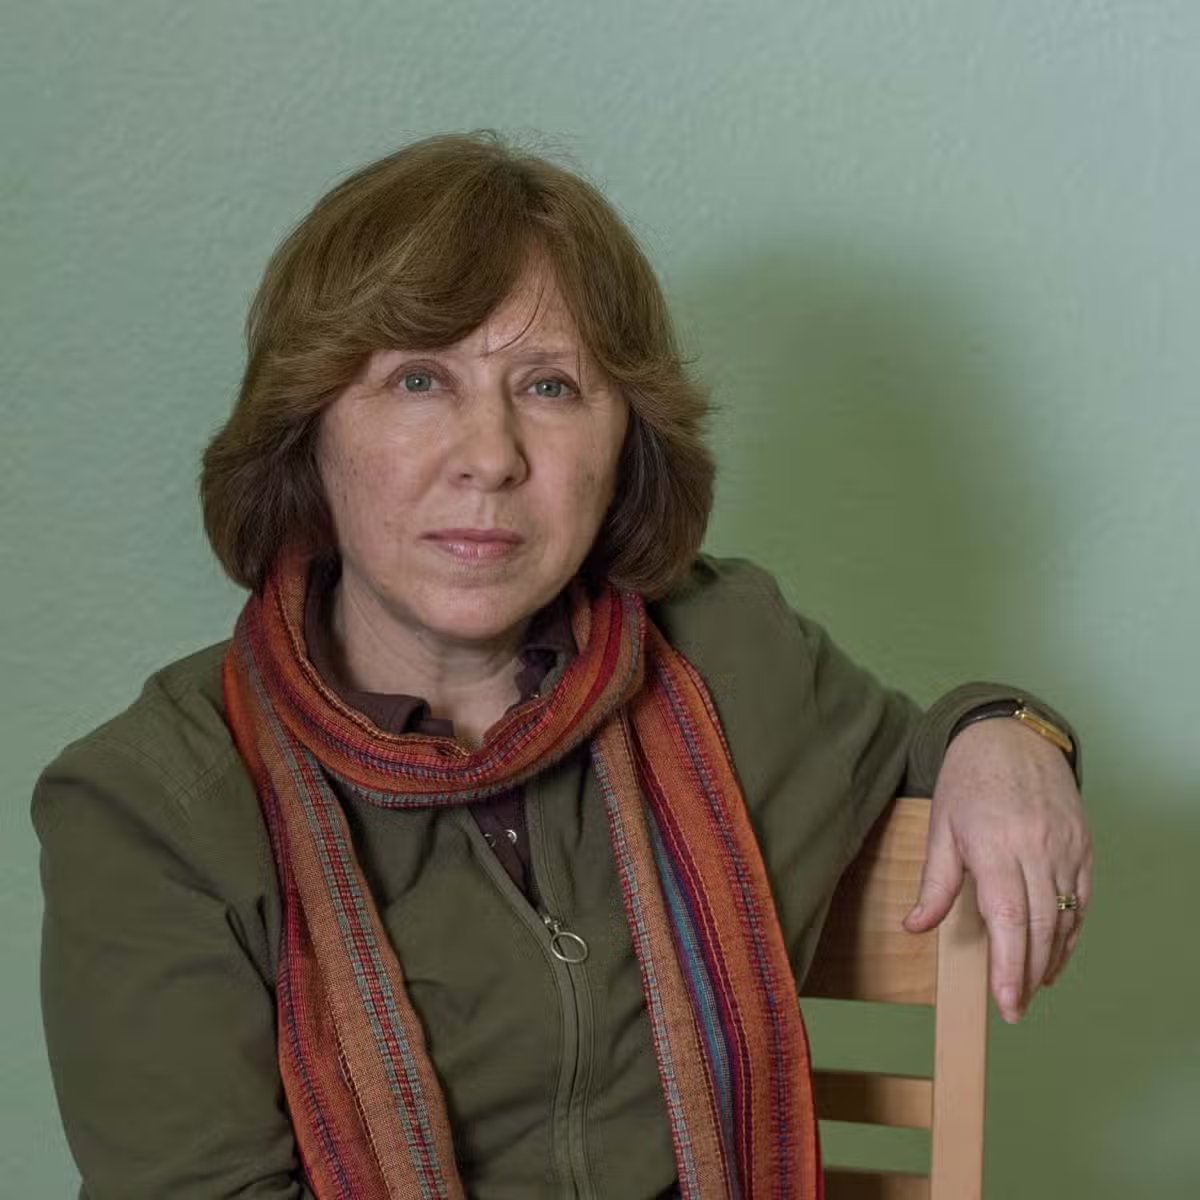 “Death is the fairest thing in the world. No one’s ever gotten out of it. The earth takes everyone – the kind, the cruel, the sinners. Aside from that, there’s no fairness on earth.”

-Svetlana Alexievich
#SvetlanaAlexievich